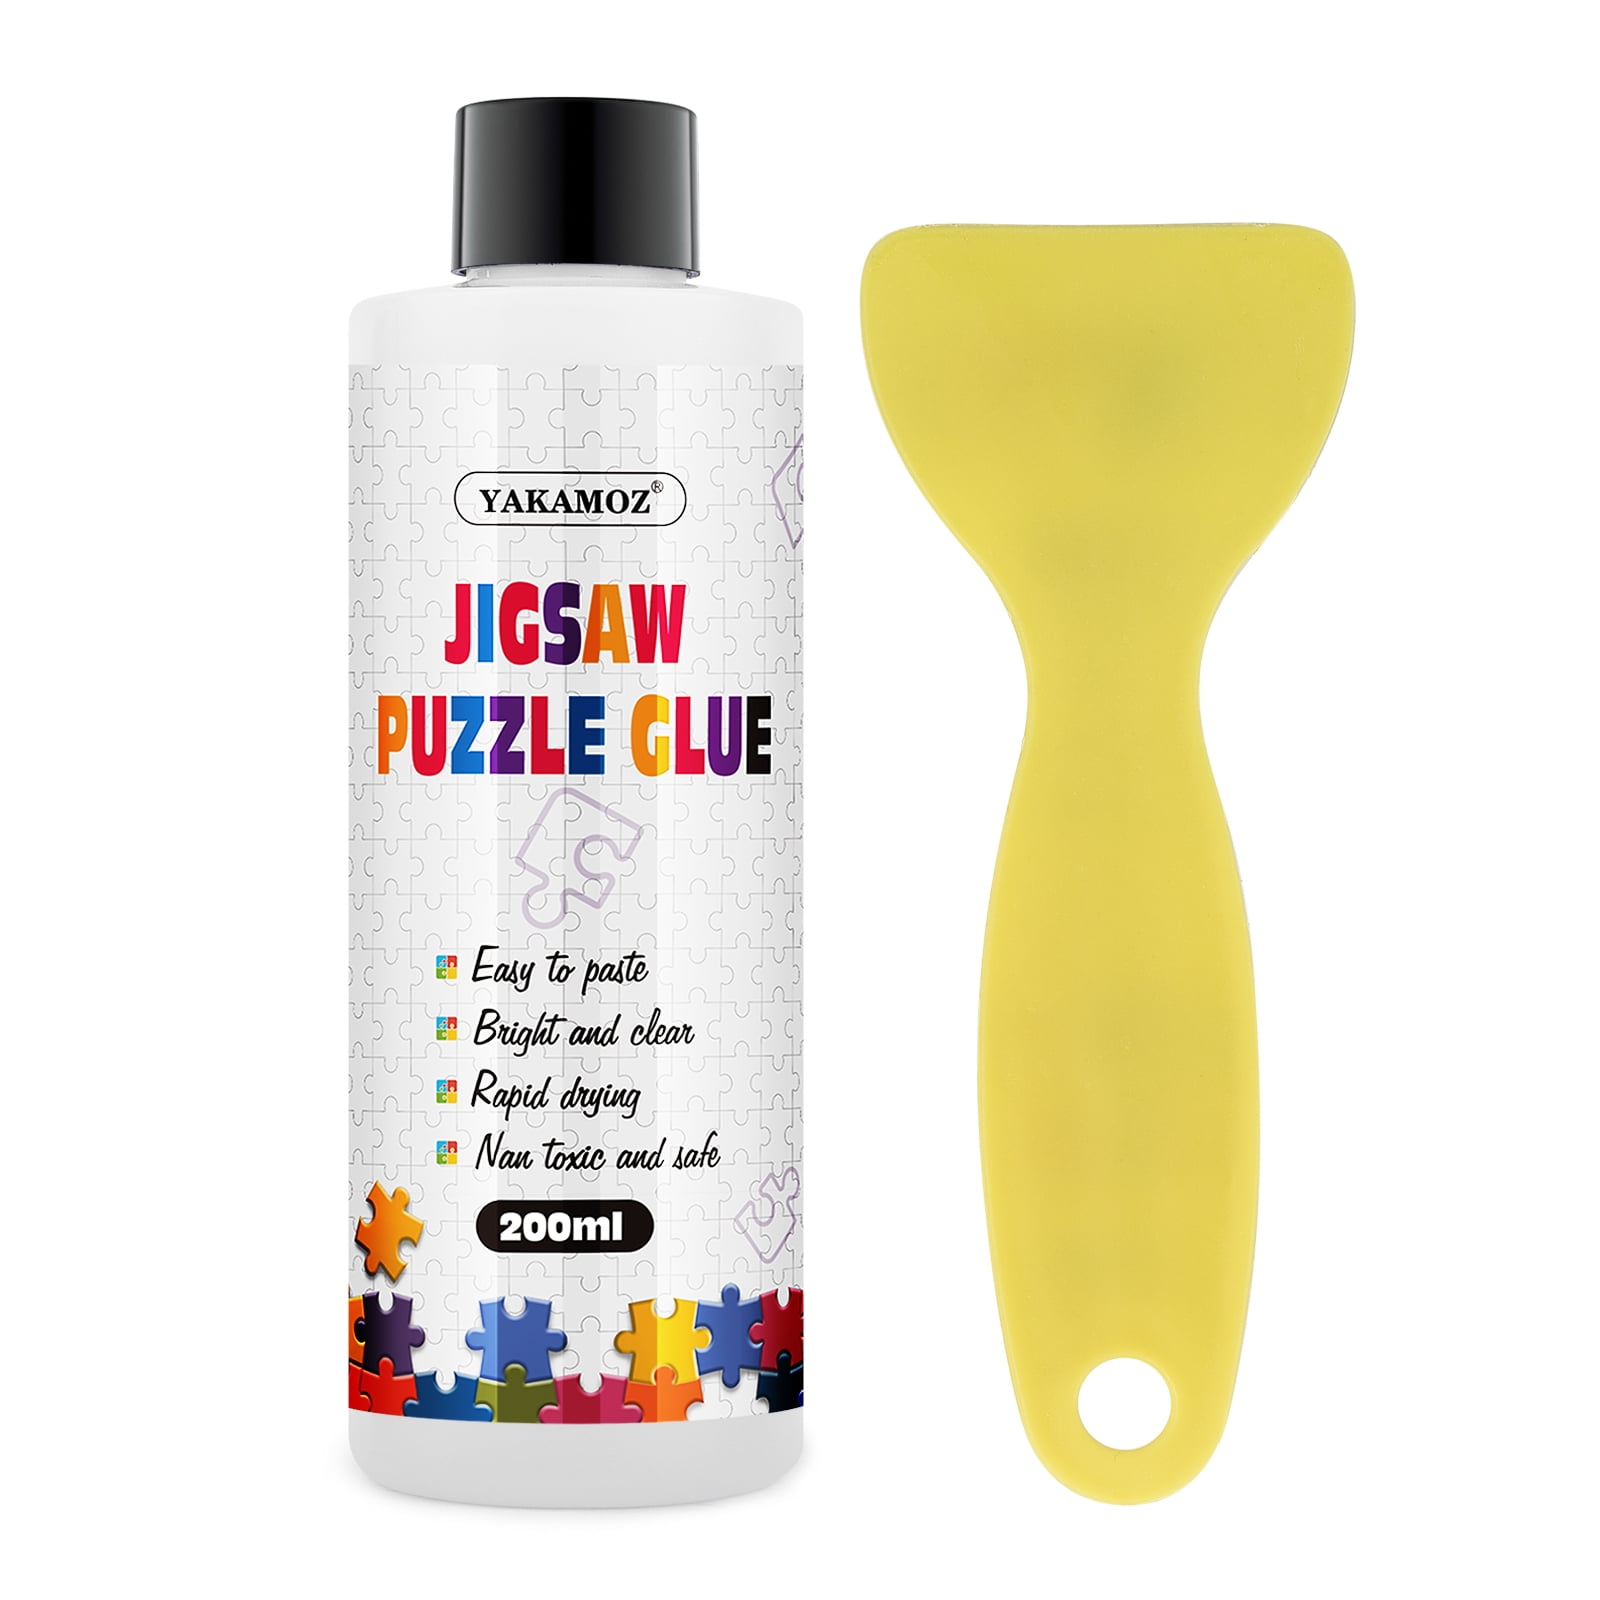 Jigsaw Puzzle Glue with Applicator, MINIWHALE Non Toxic Clear Glue